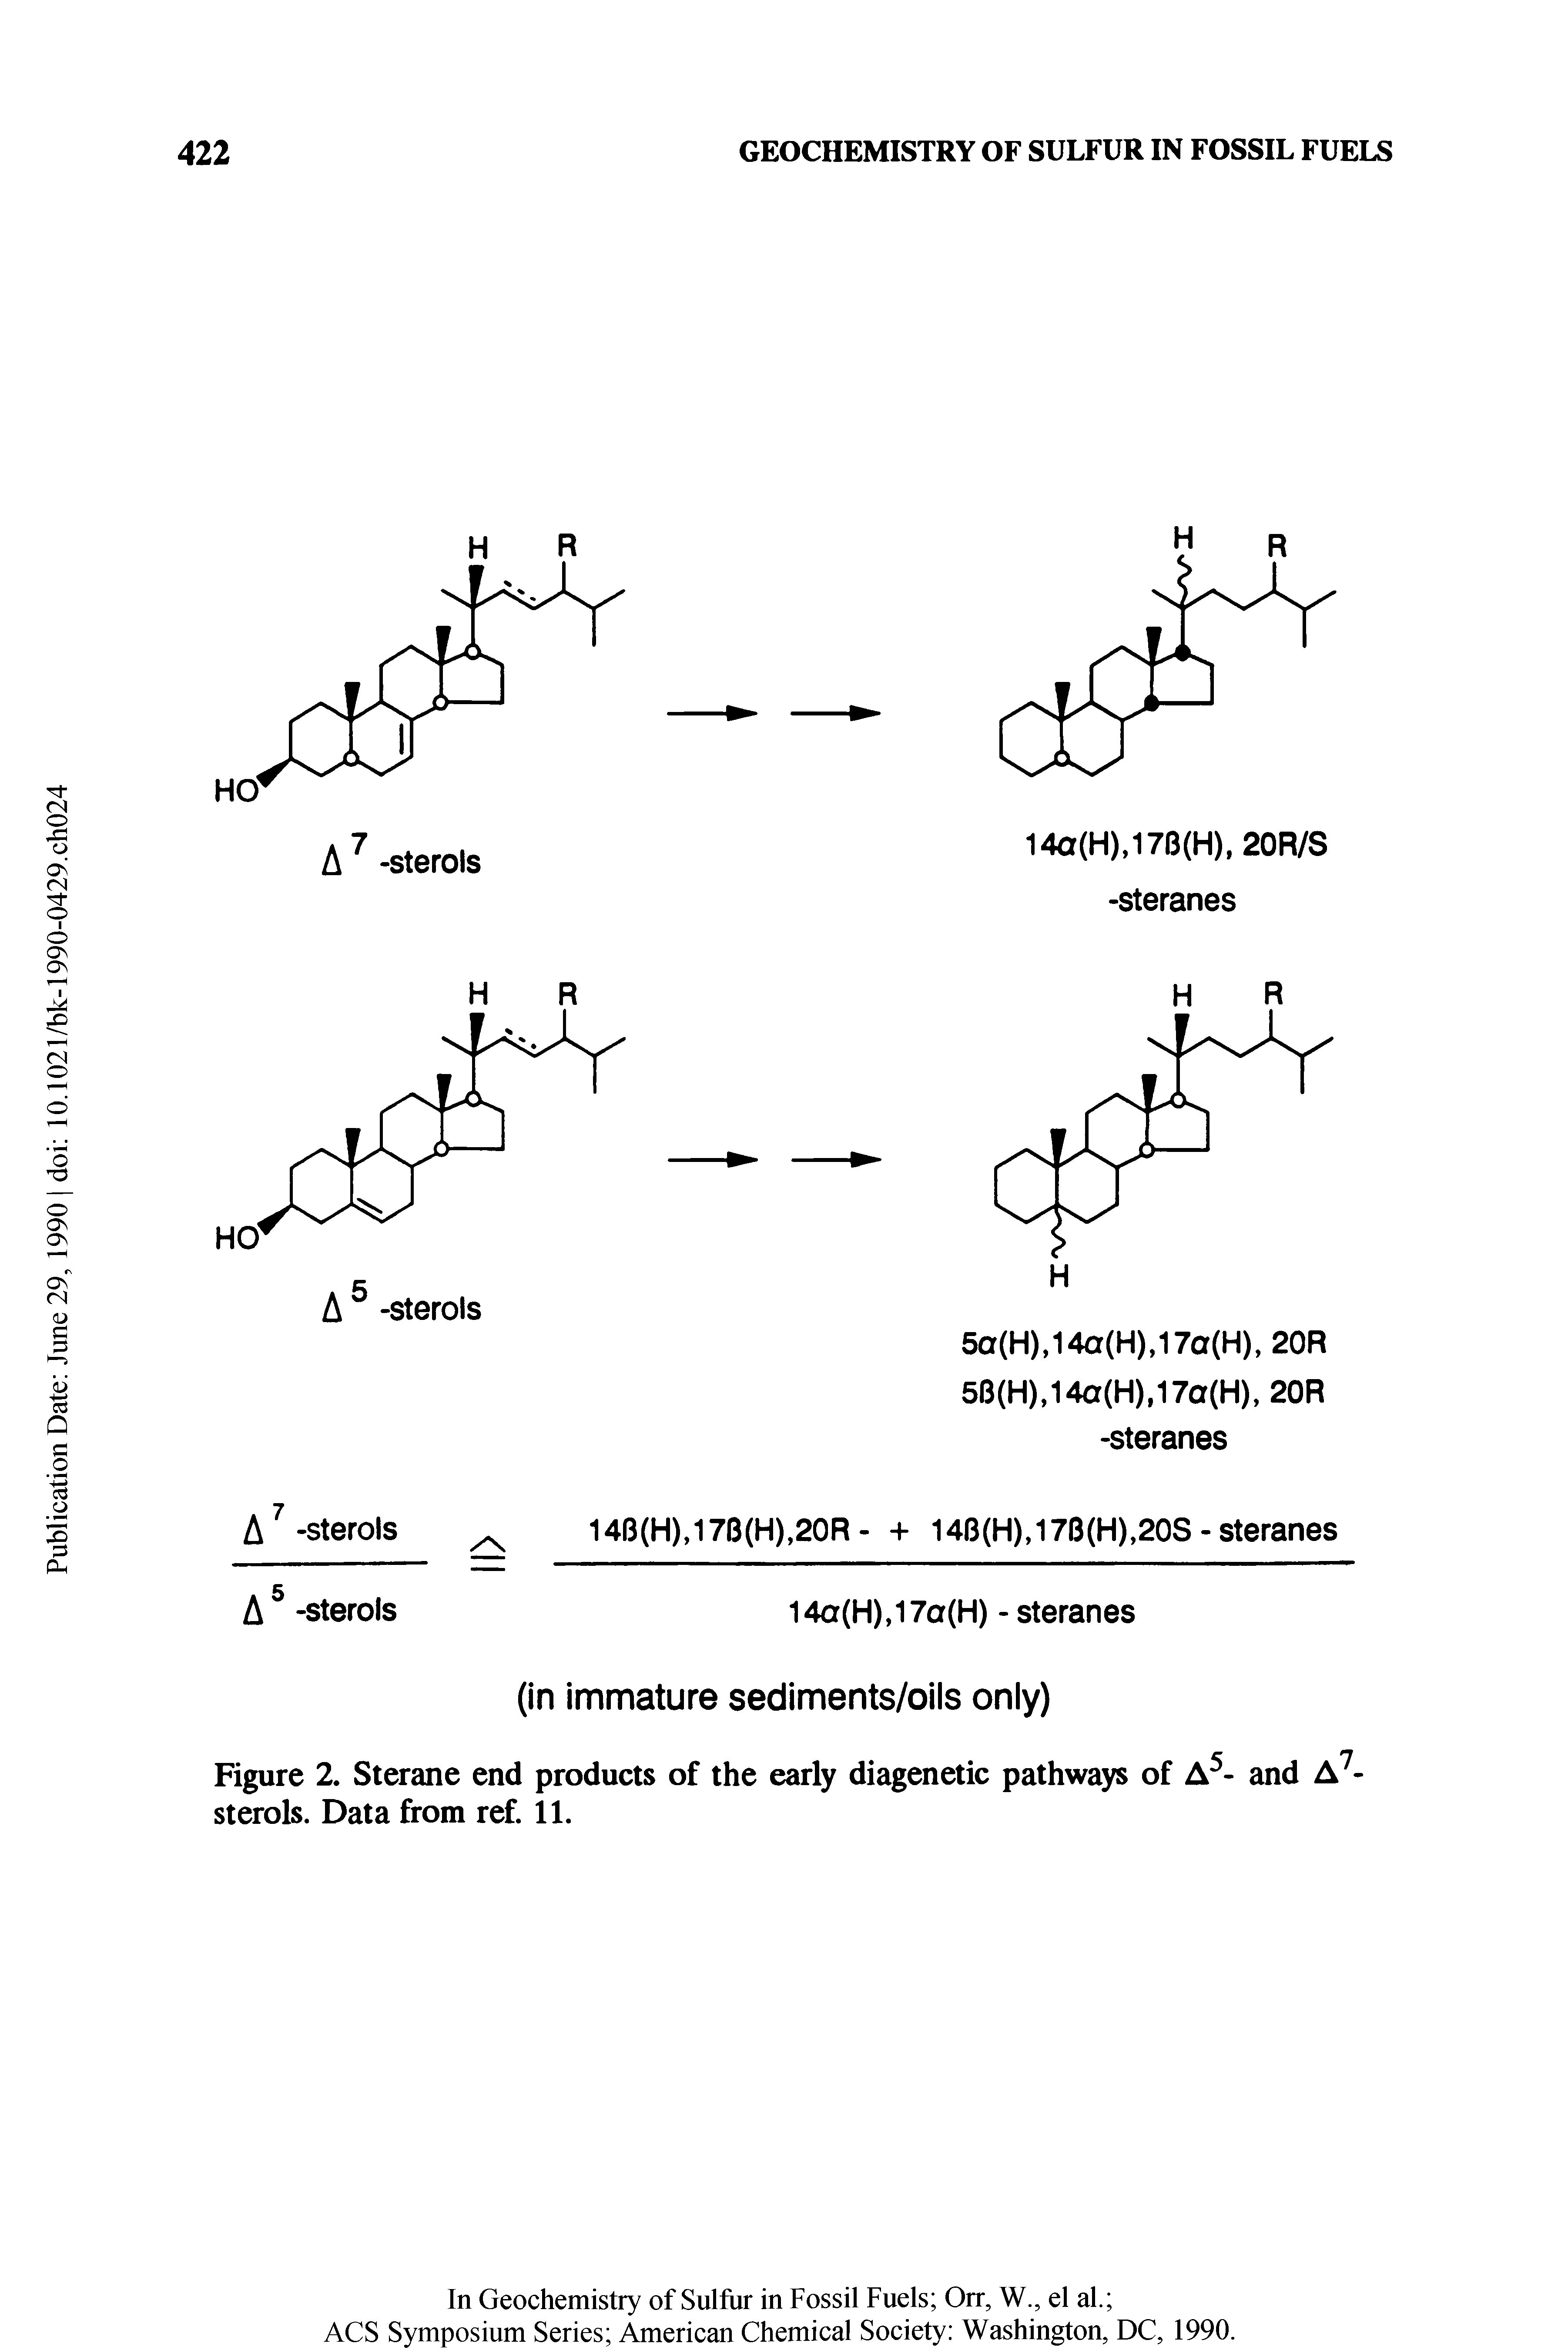 Figure 2. Sterane end products of the early diagenetic pathways of A5- and A7 sterols. Data from ref. 11.